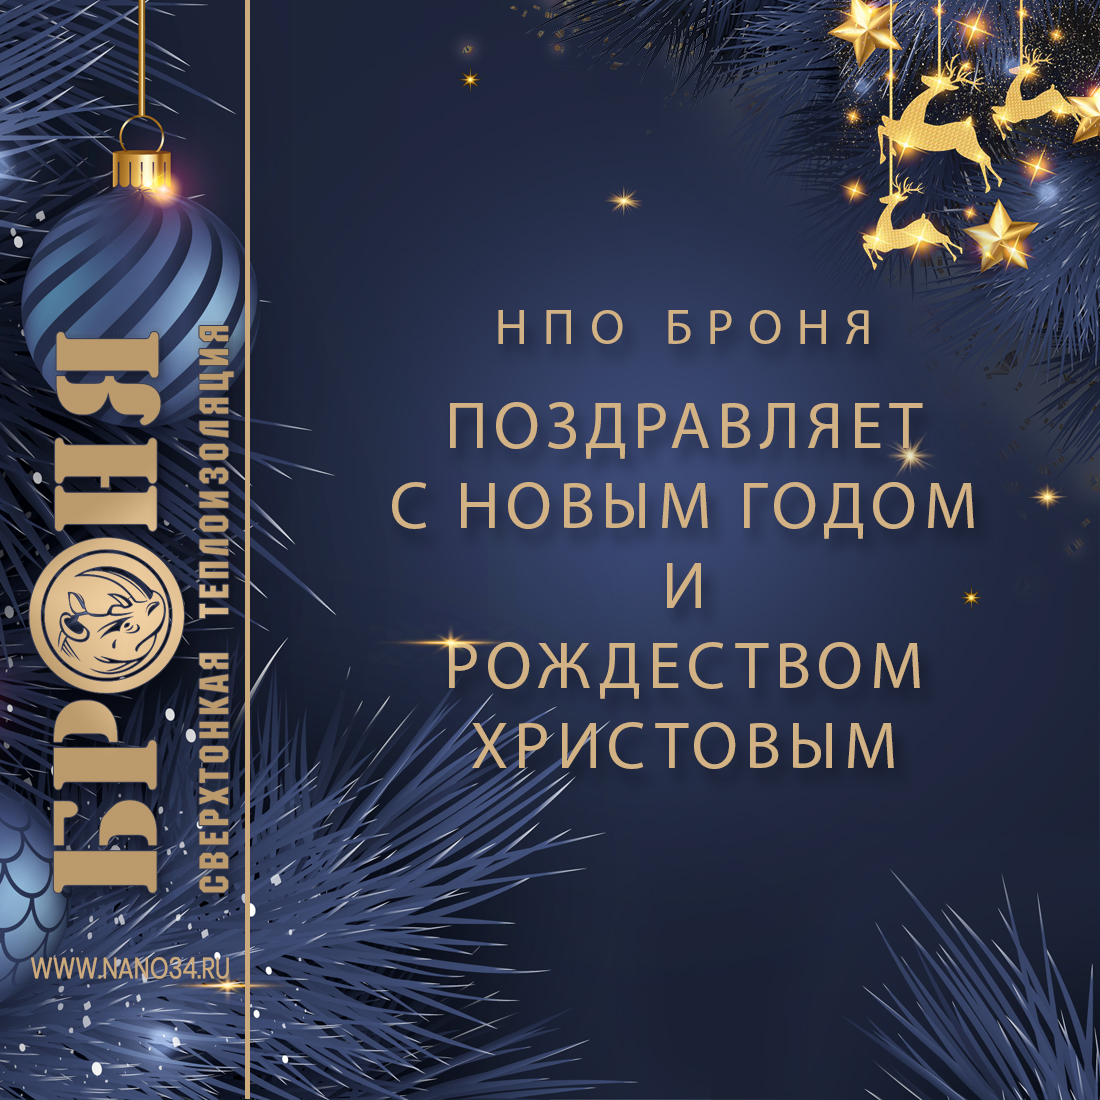 NPO Bronya wishes you Happy New Year and Merry Christmas!